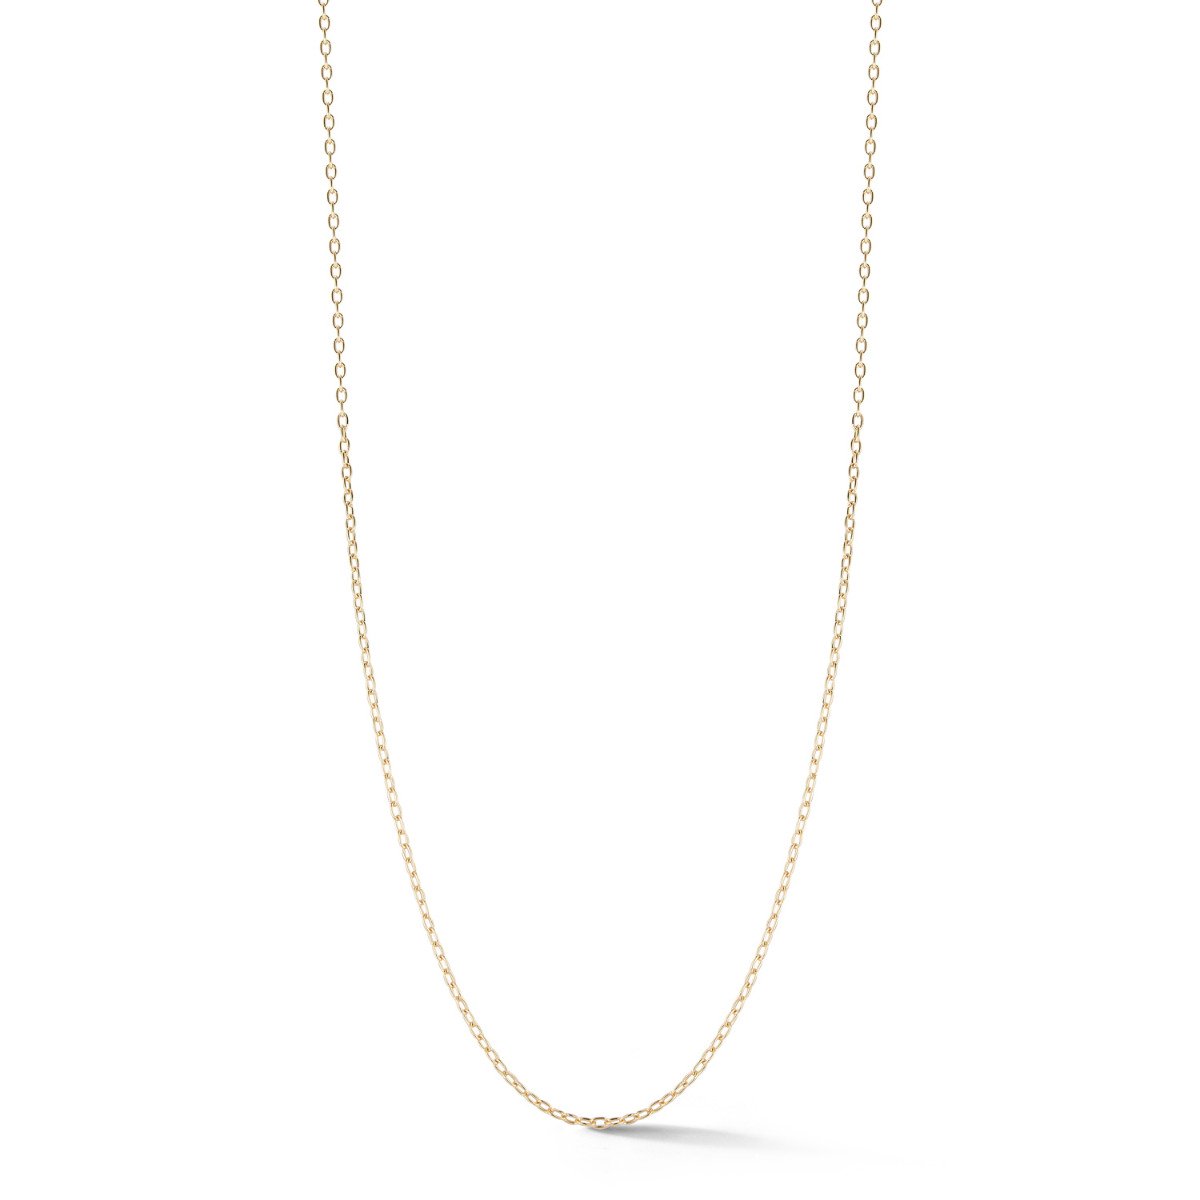 Walters Faith 18kt Yellow Gold Chain Link Necklace